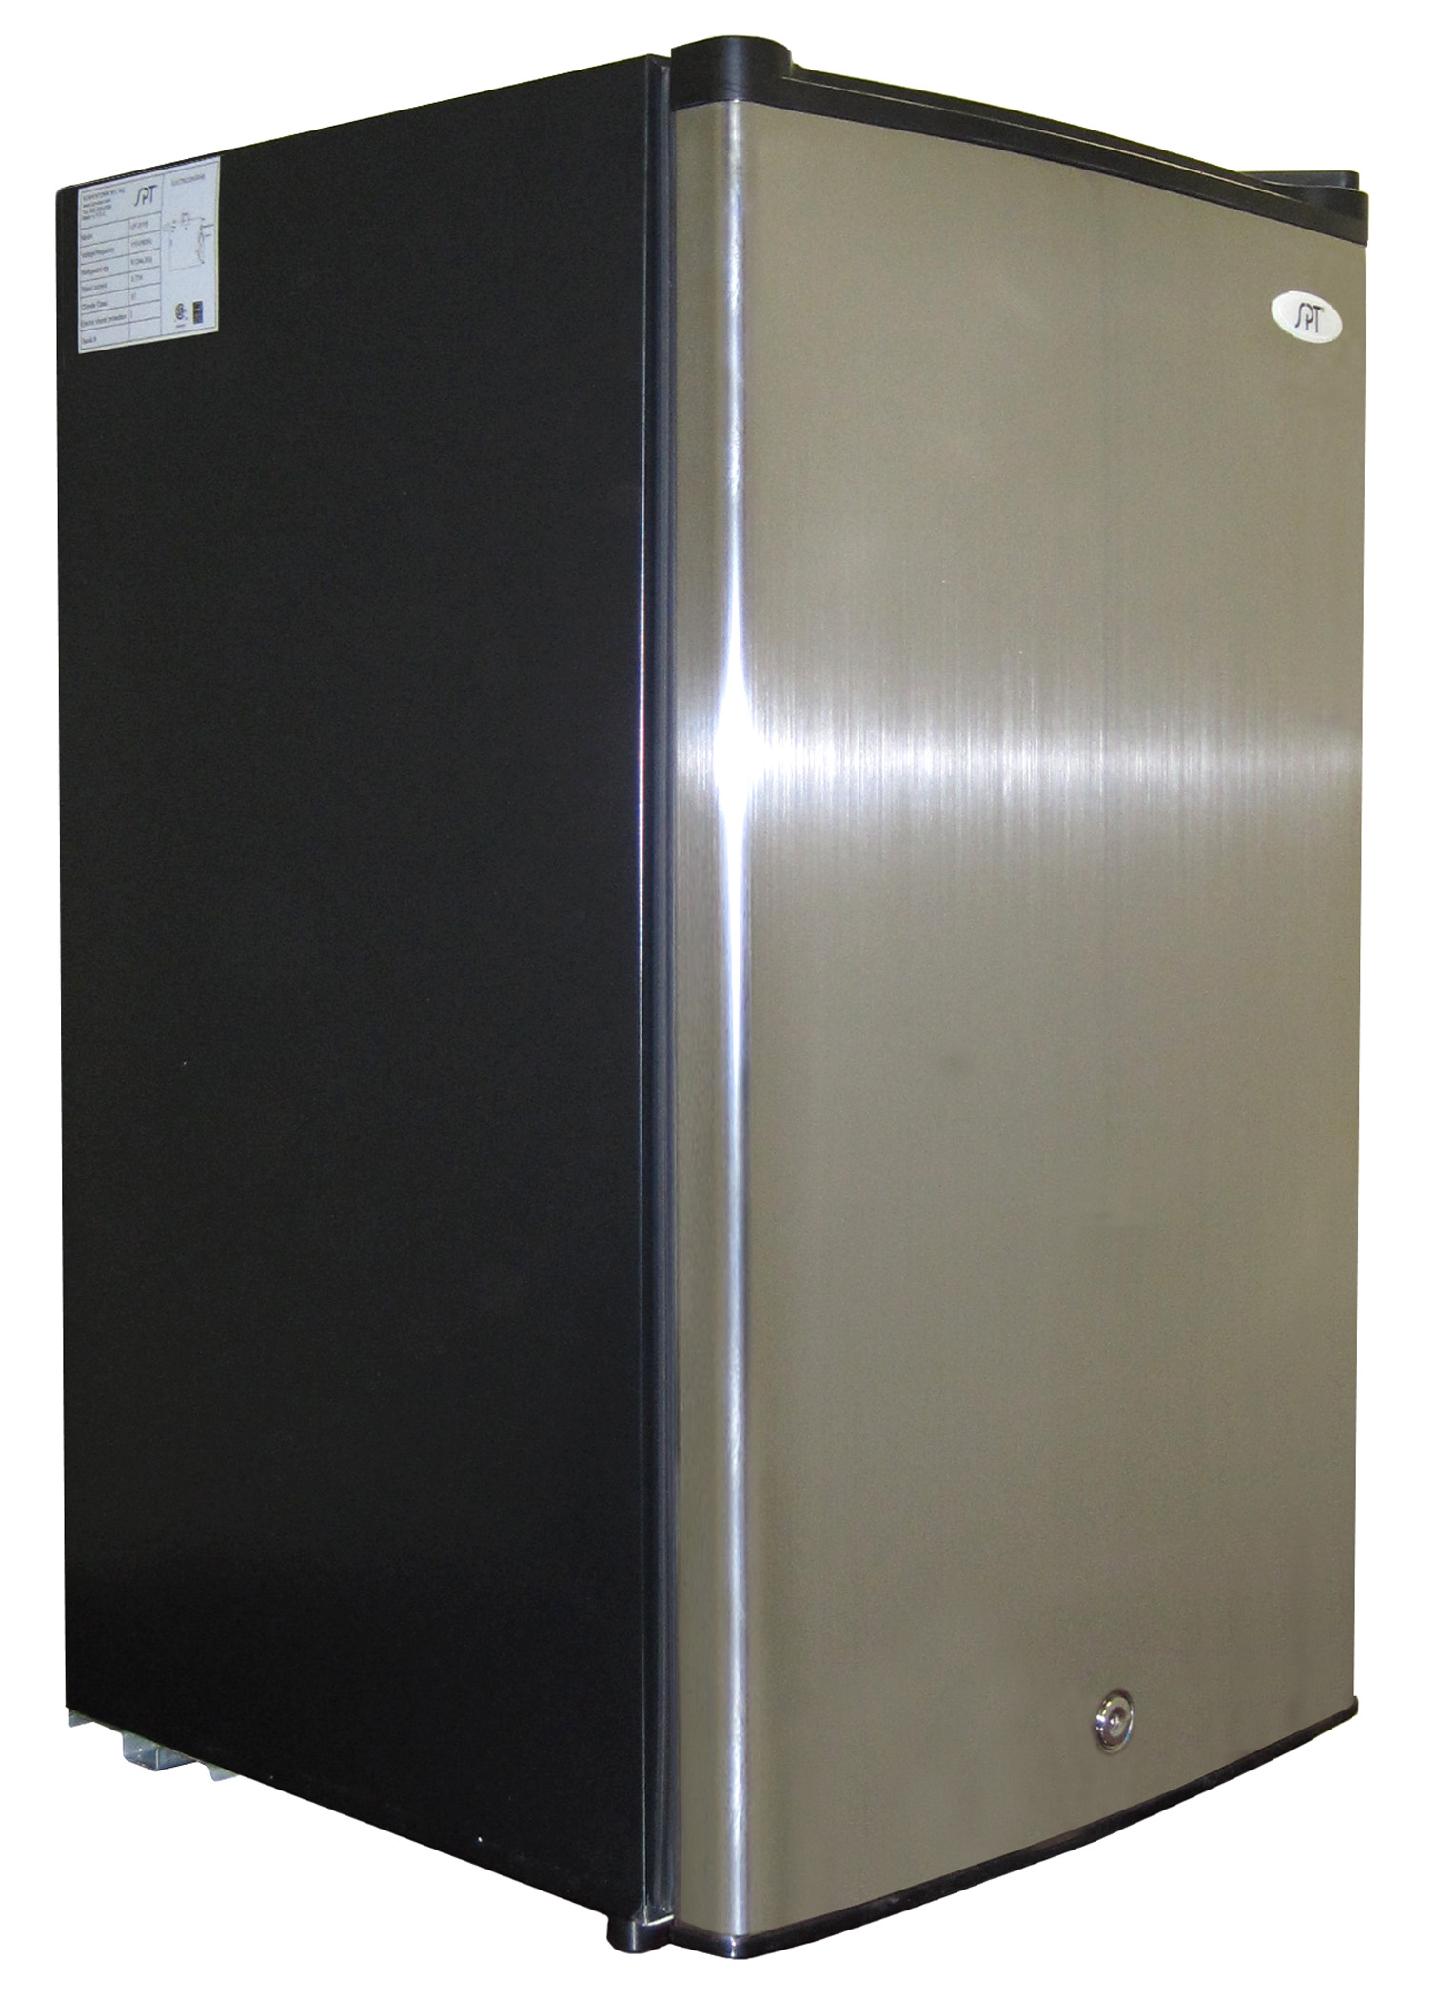 SPT UF-311S 3.0 cu.ft. Upright Freezer with Energy Star - Stainless